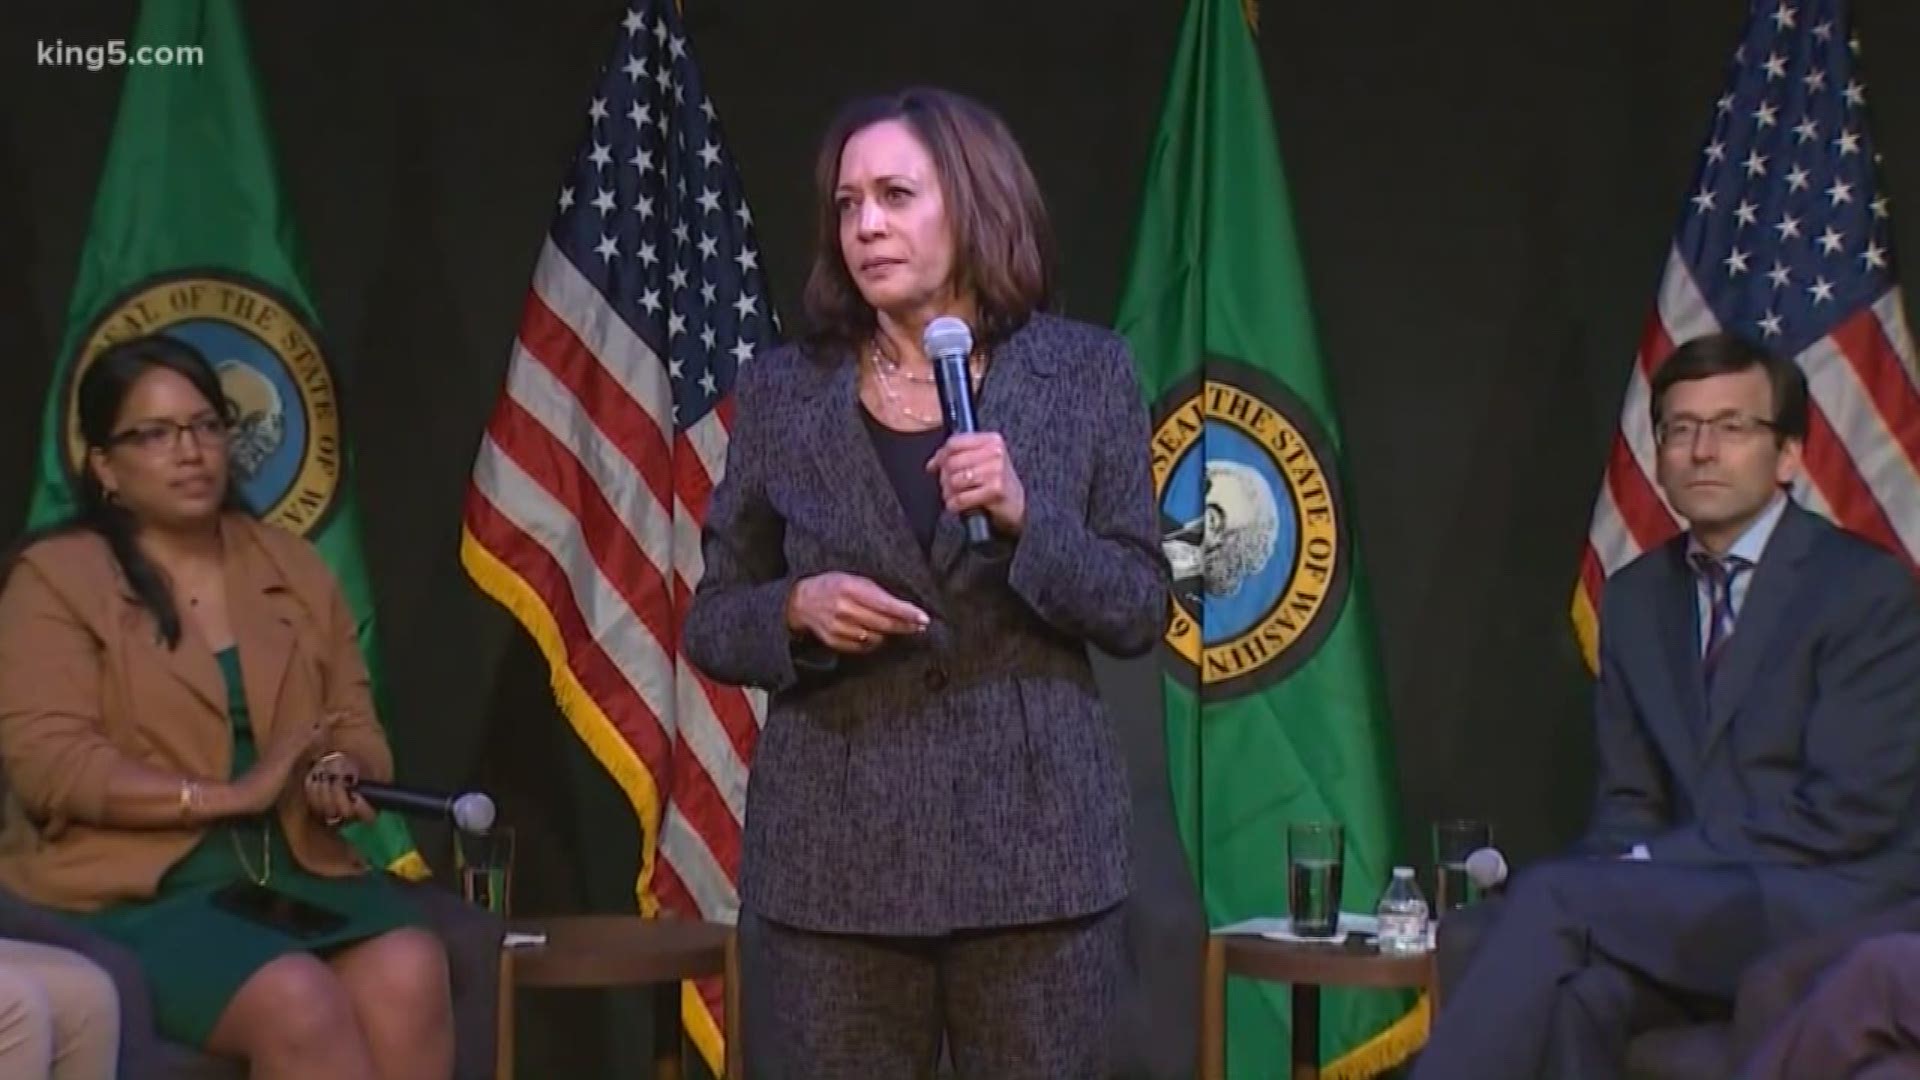 Presidential candidate Kamala Harris led a roundtable discussion on gun safety in Seattle on Friday before holding a fundraiser in Capitol Hill.